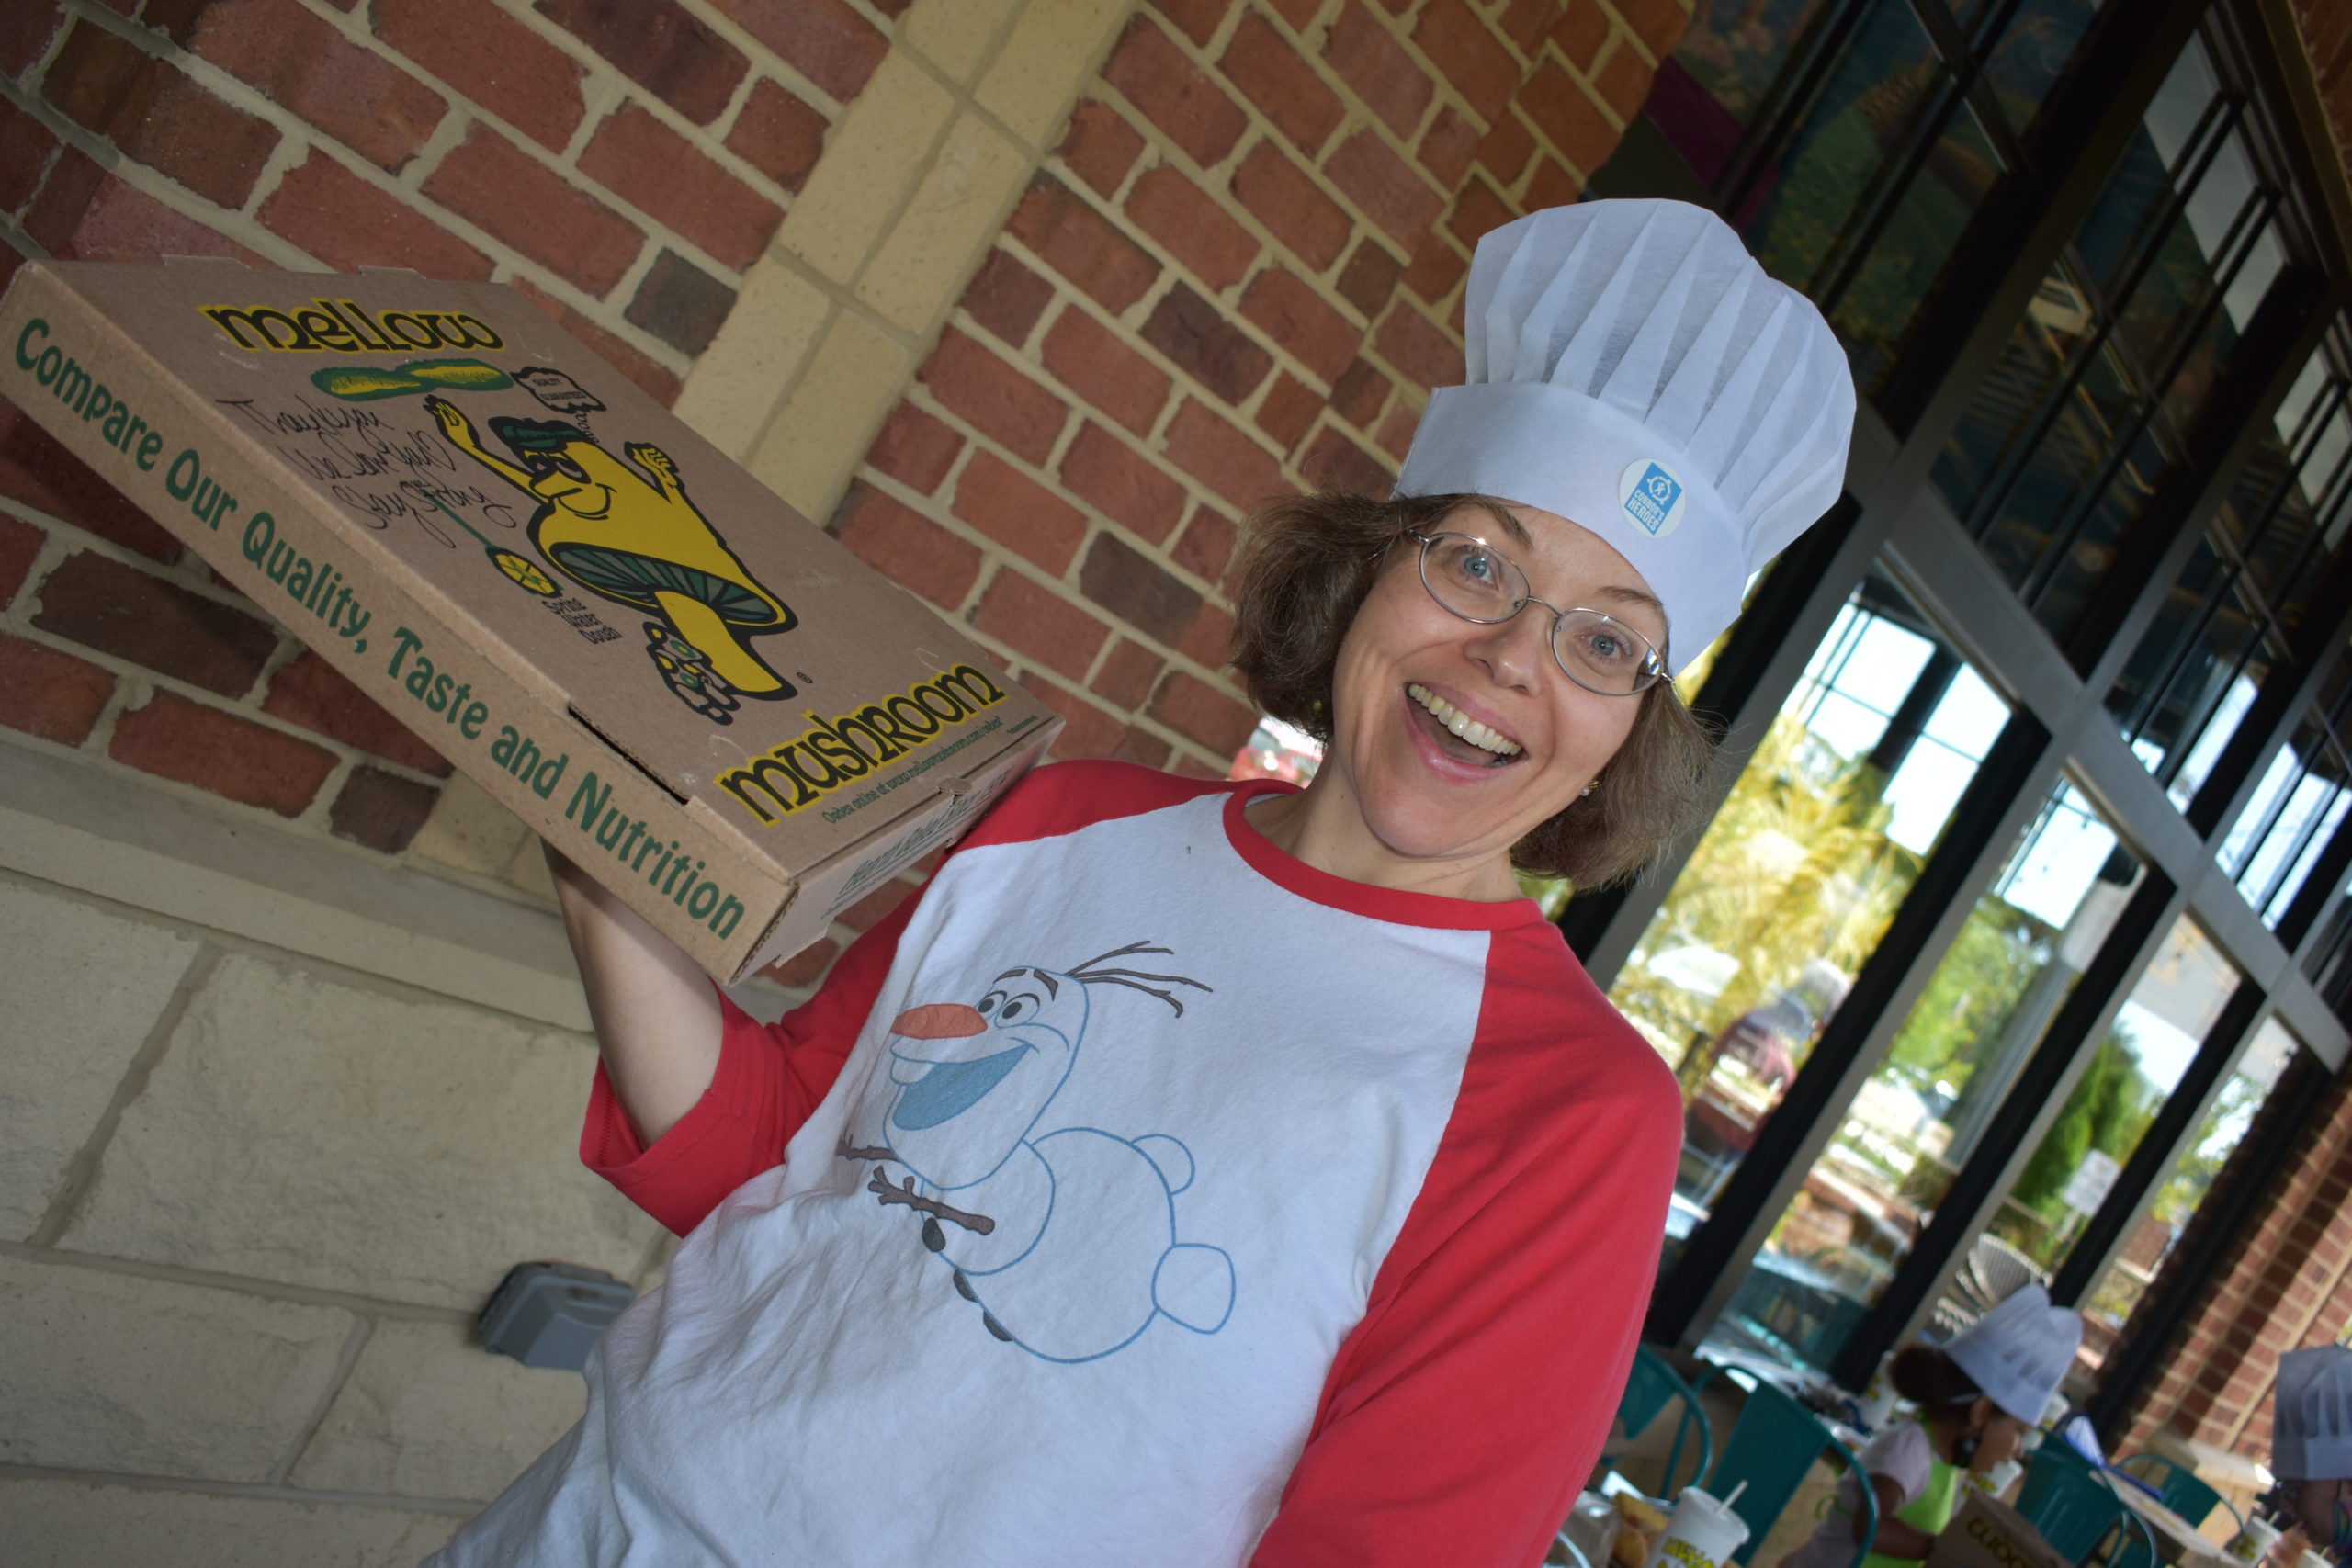 Image a woman wearing a chef hat holding a pizza box and smiling